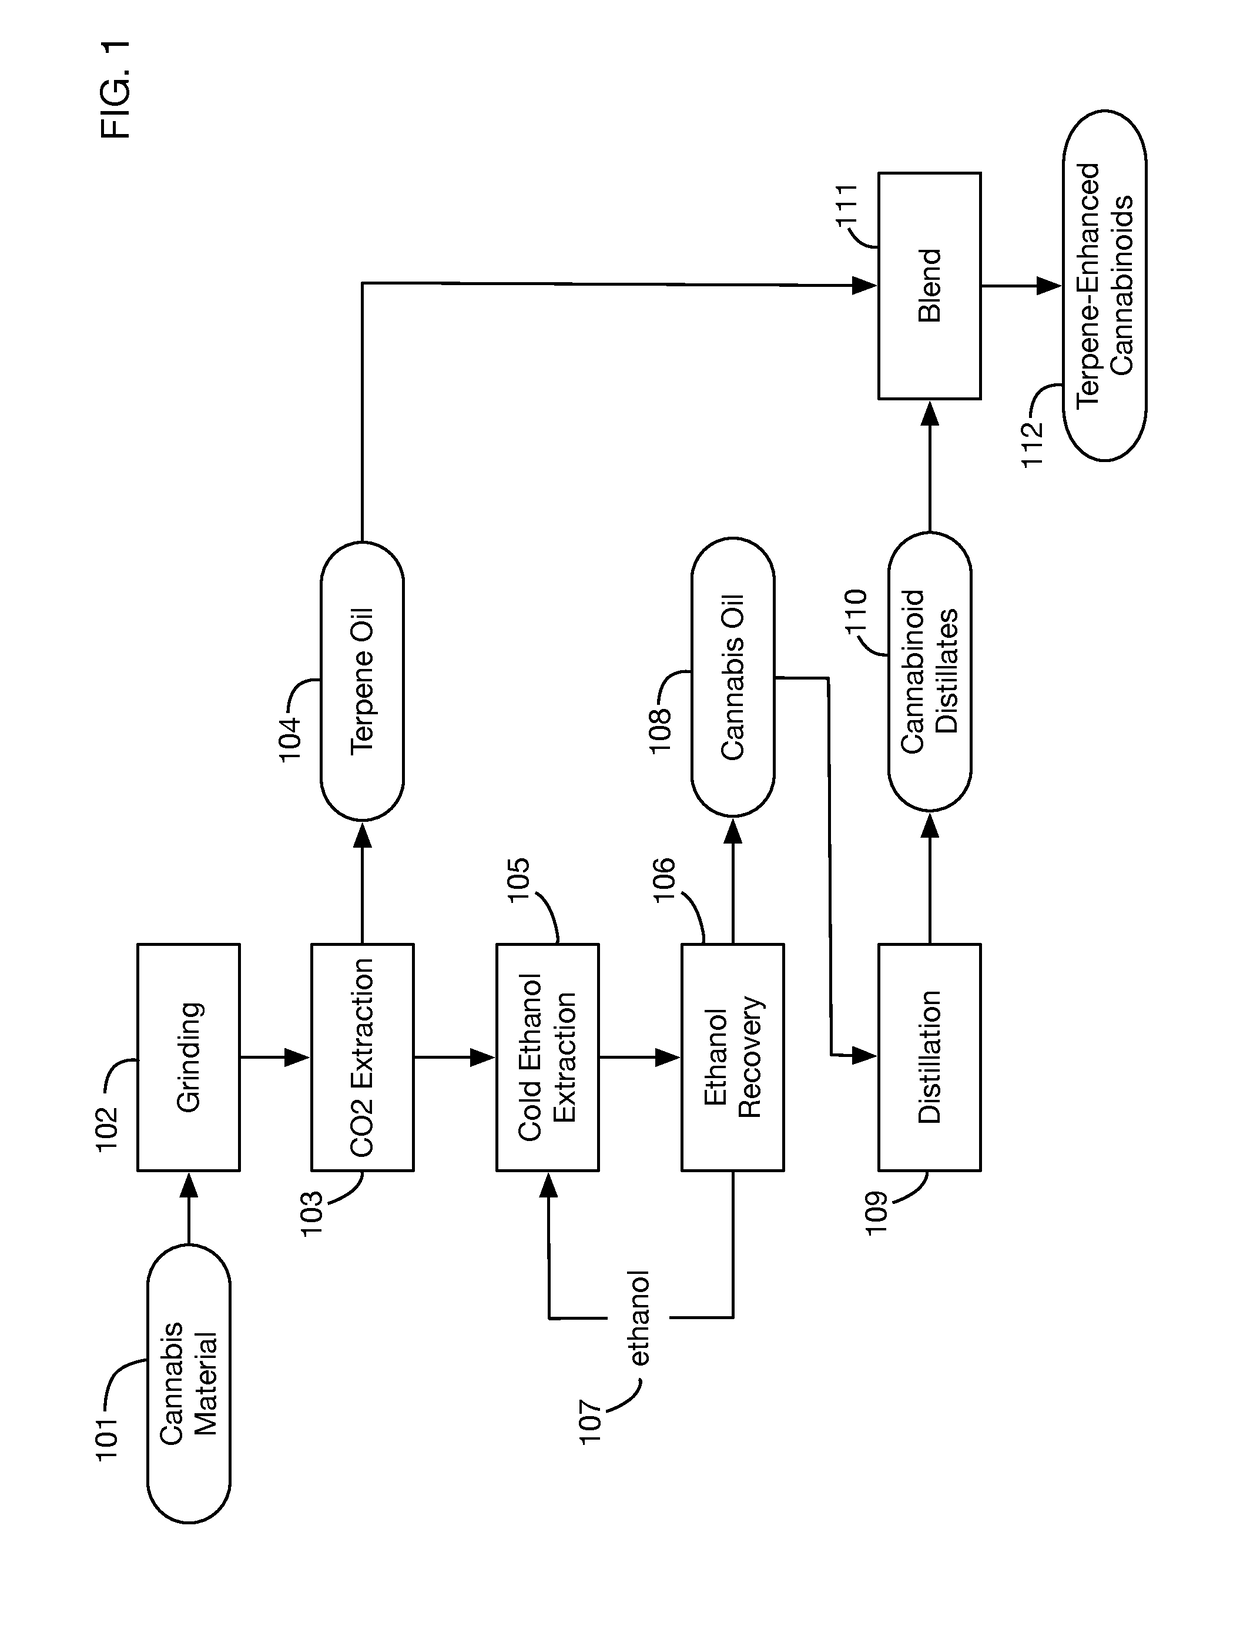 Method for removing contaminants from cannabinoid distillates